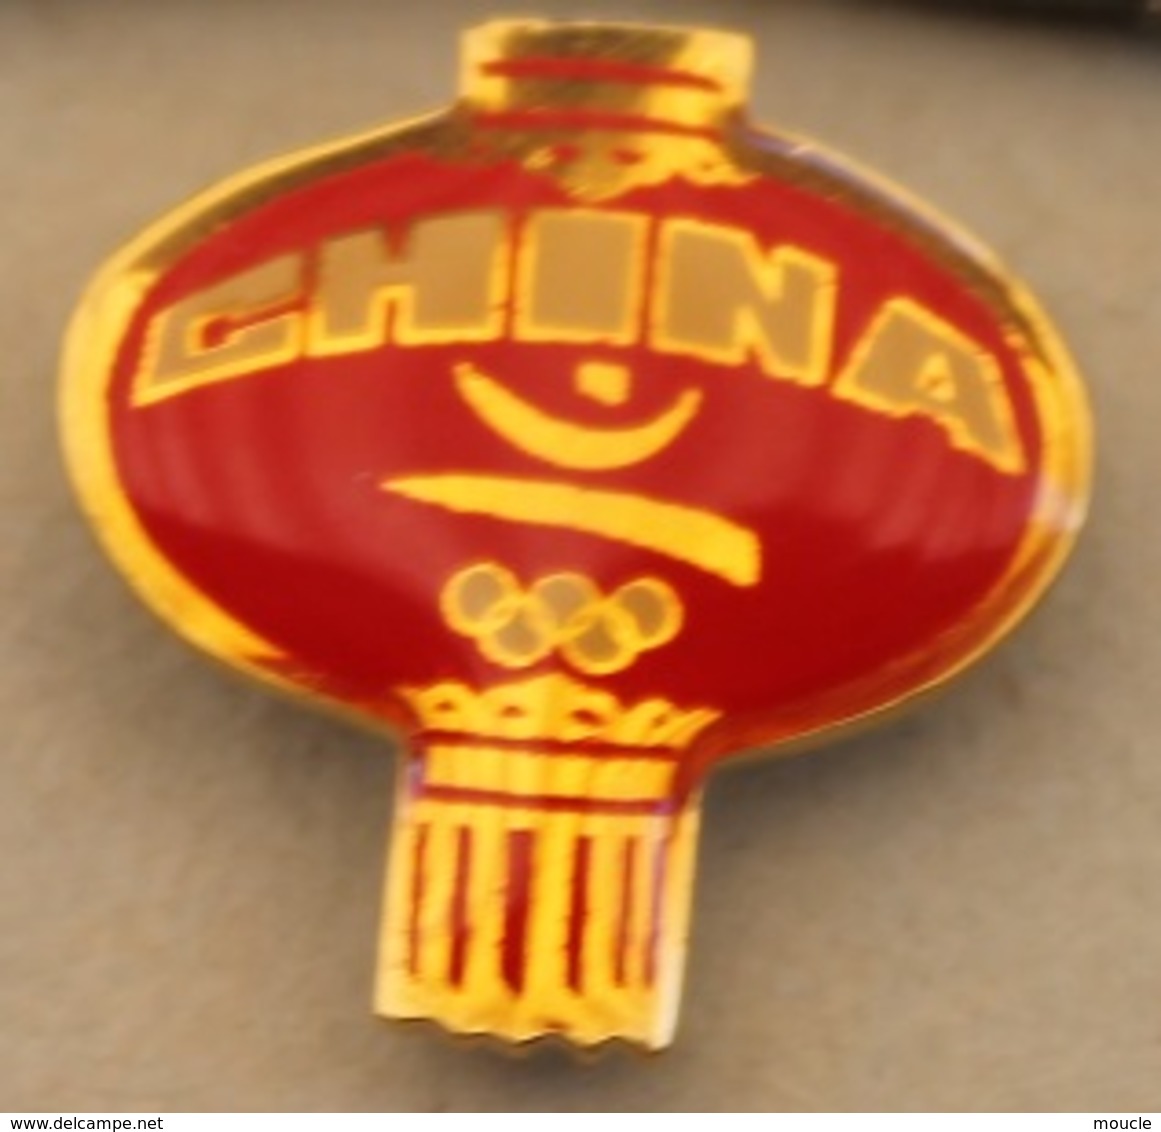 JEUX OLYMPIQUES  - TEAM CHINA - EQUIPE DE CHINE - COMITE OLYMPIQUE - BARCELONA 92   -      (20) - Olympische Spiele